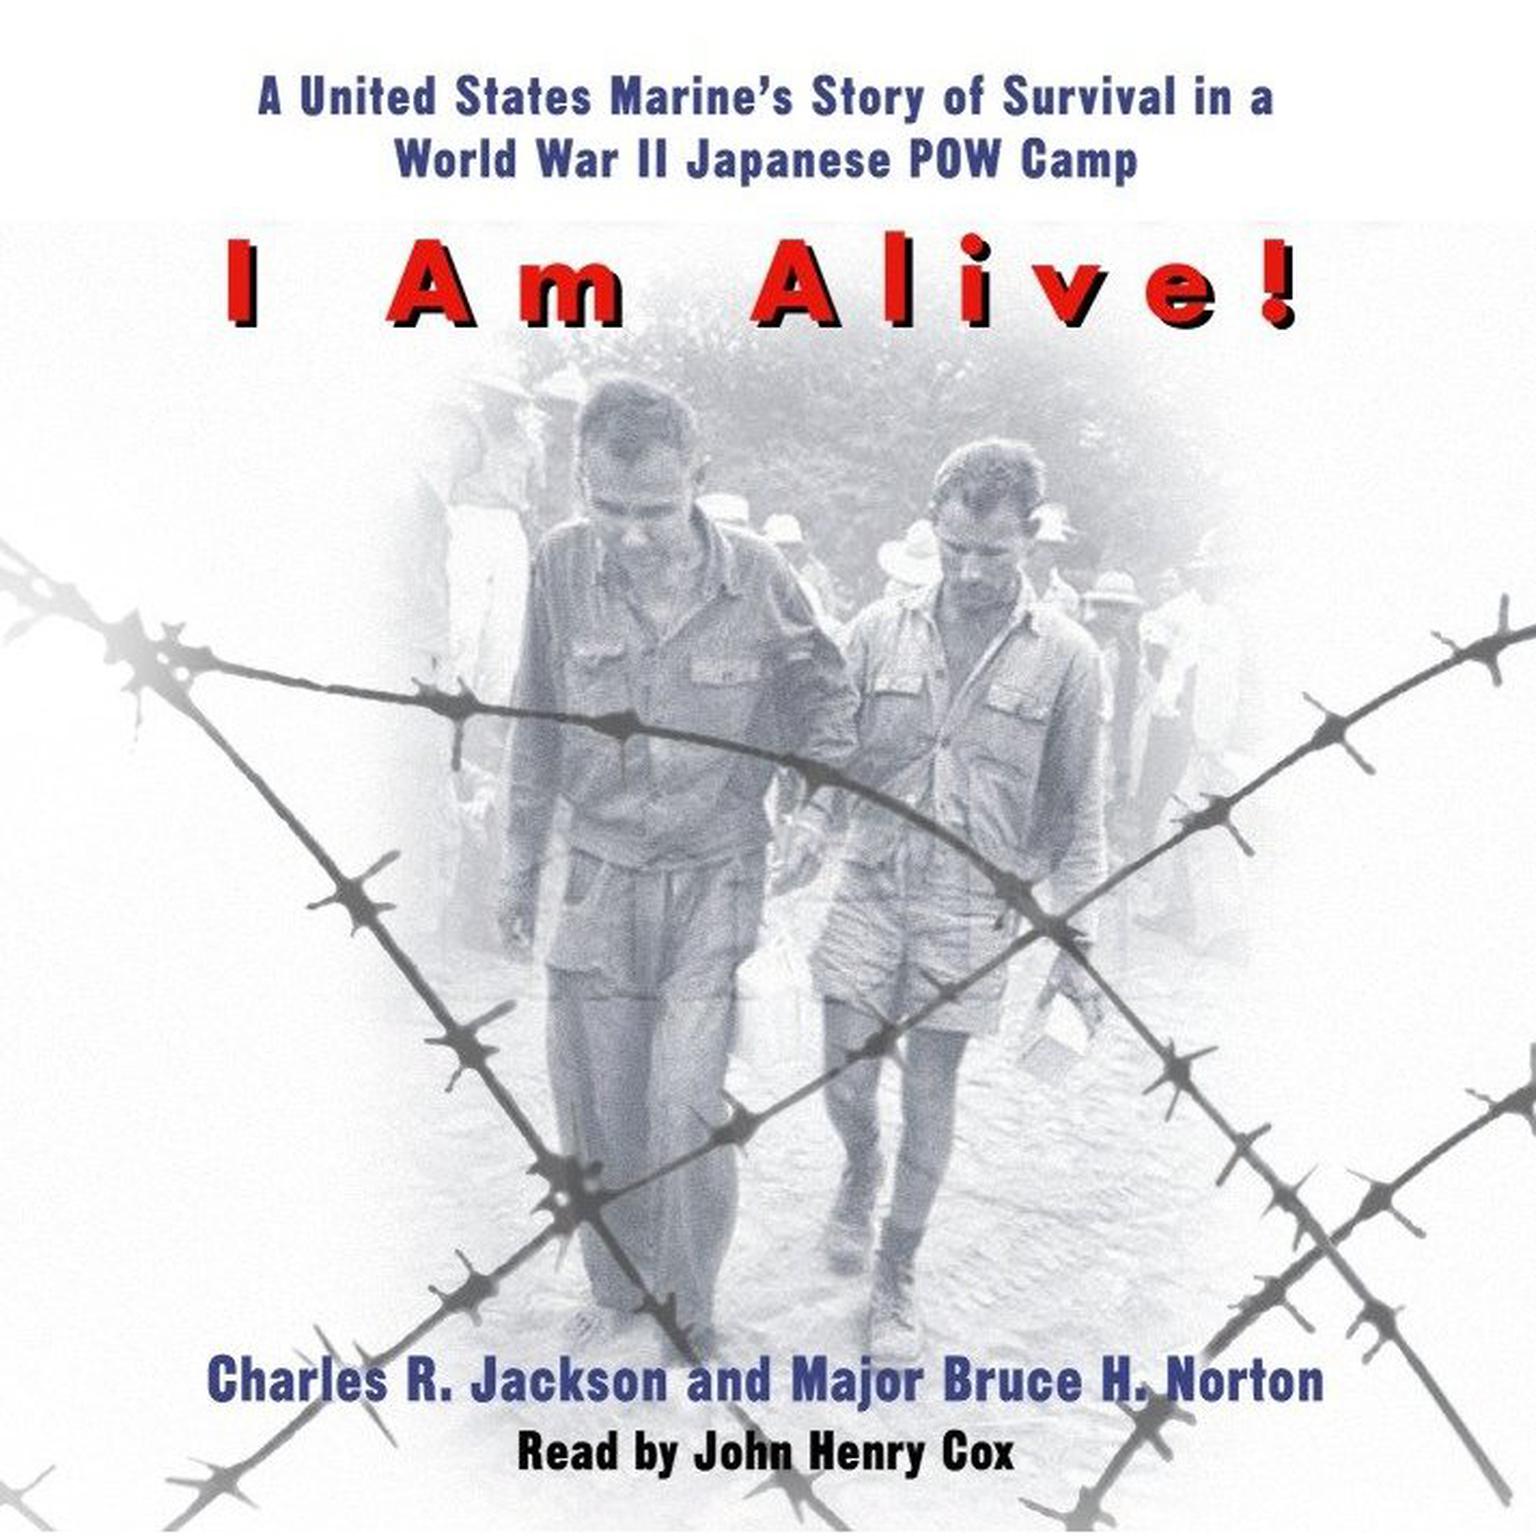 I Am Alive! (Abridged): A United States Marines Story of Survival in a World War II Japanese POW Camp Audiobook, by Charles R. Jackson